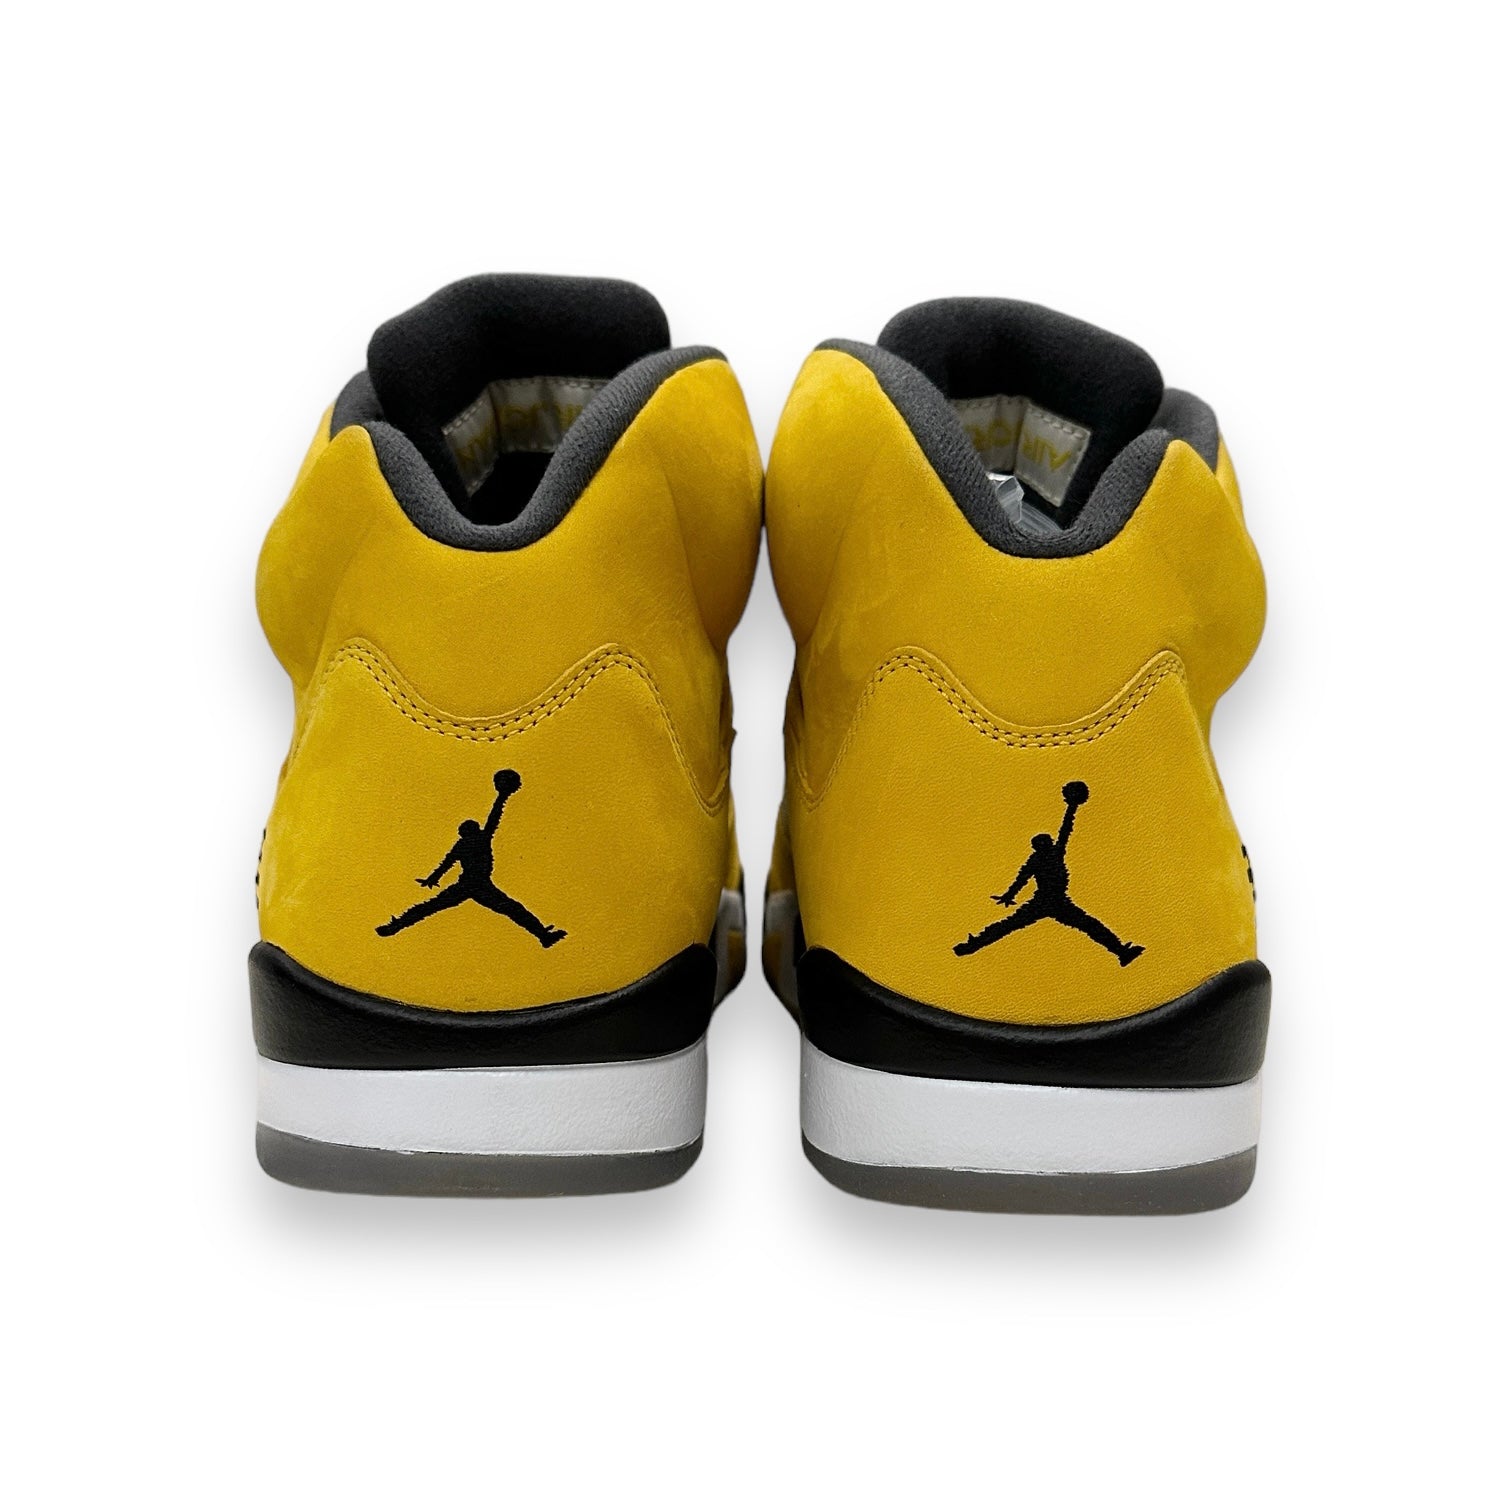 CONCEPT SHOP WTS -ARCHIVES & SNEAKERS- / NIKE OVO AIR JORDAN 5 T23 ...